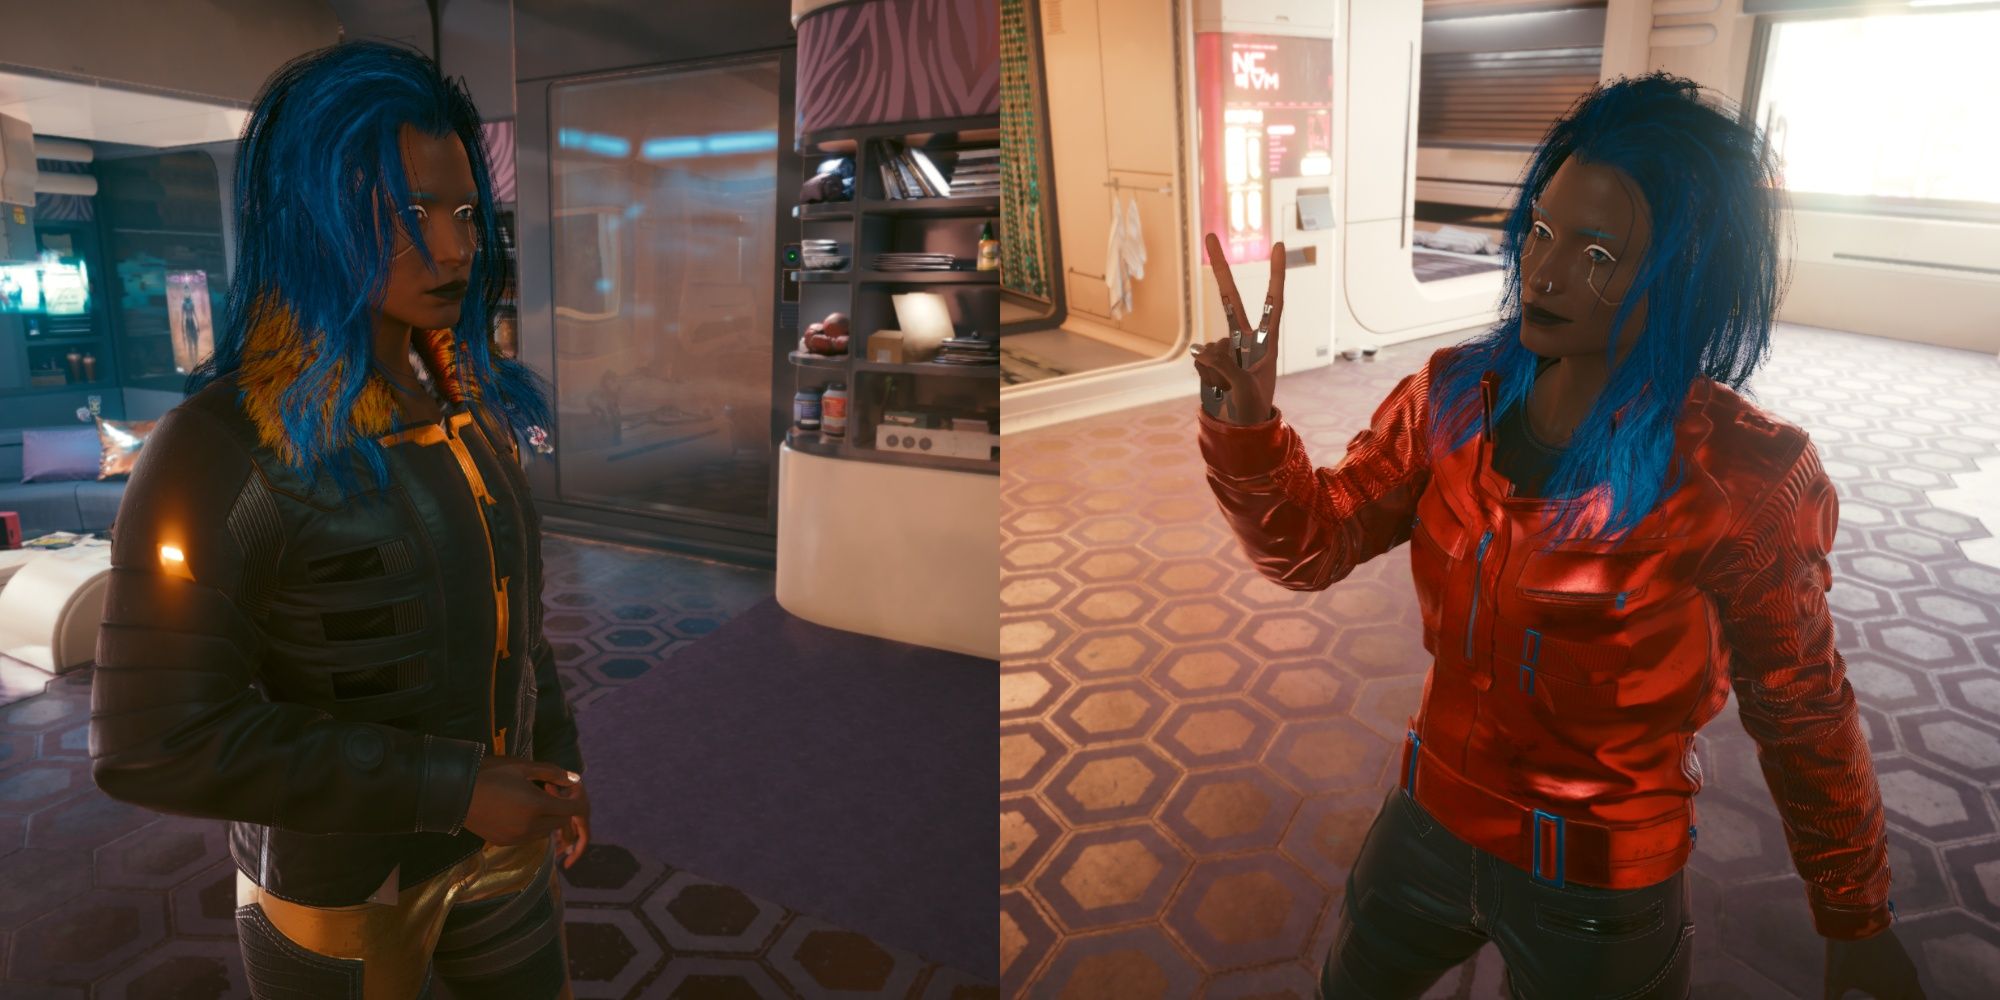 Collage image of V modeling two iconic jackets in Cyberpunk 2077.